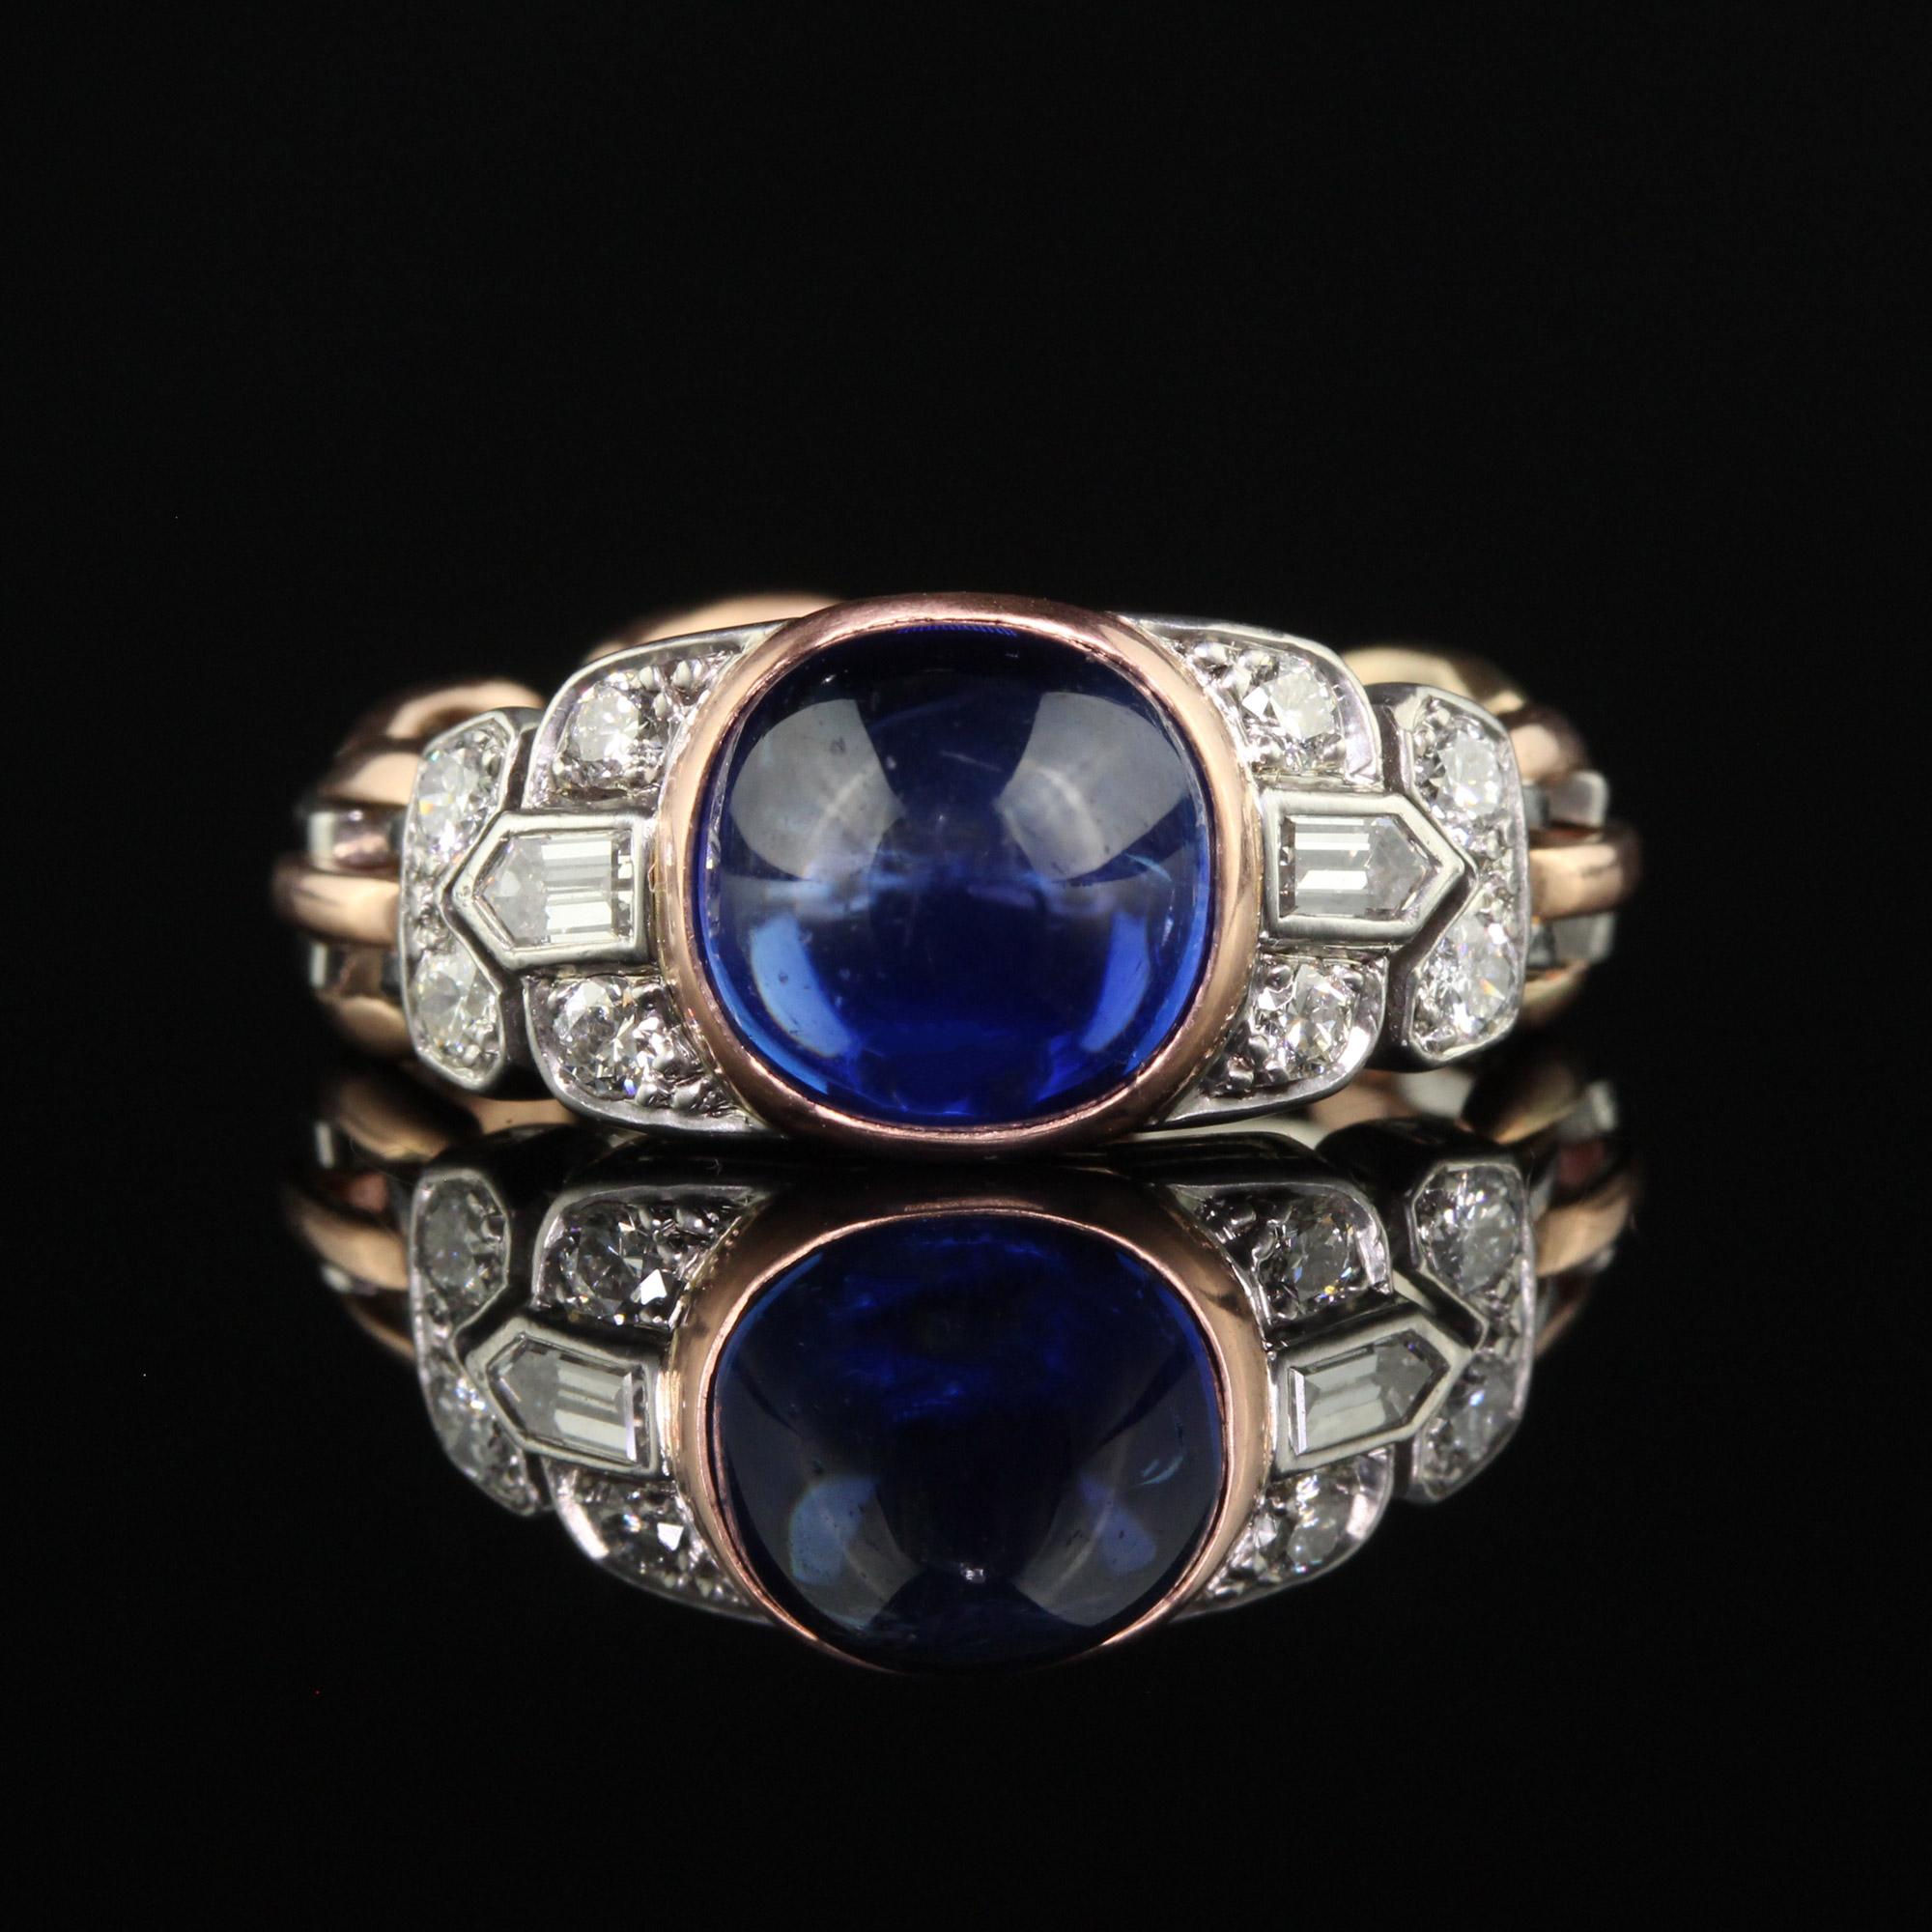 Antique Art Deco 18K Gold Platinum Kashmir Sapphire Diamond Flexible Ring - AGL In Good Condition For Sale In Great Neck, NY